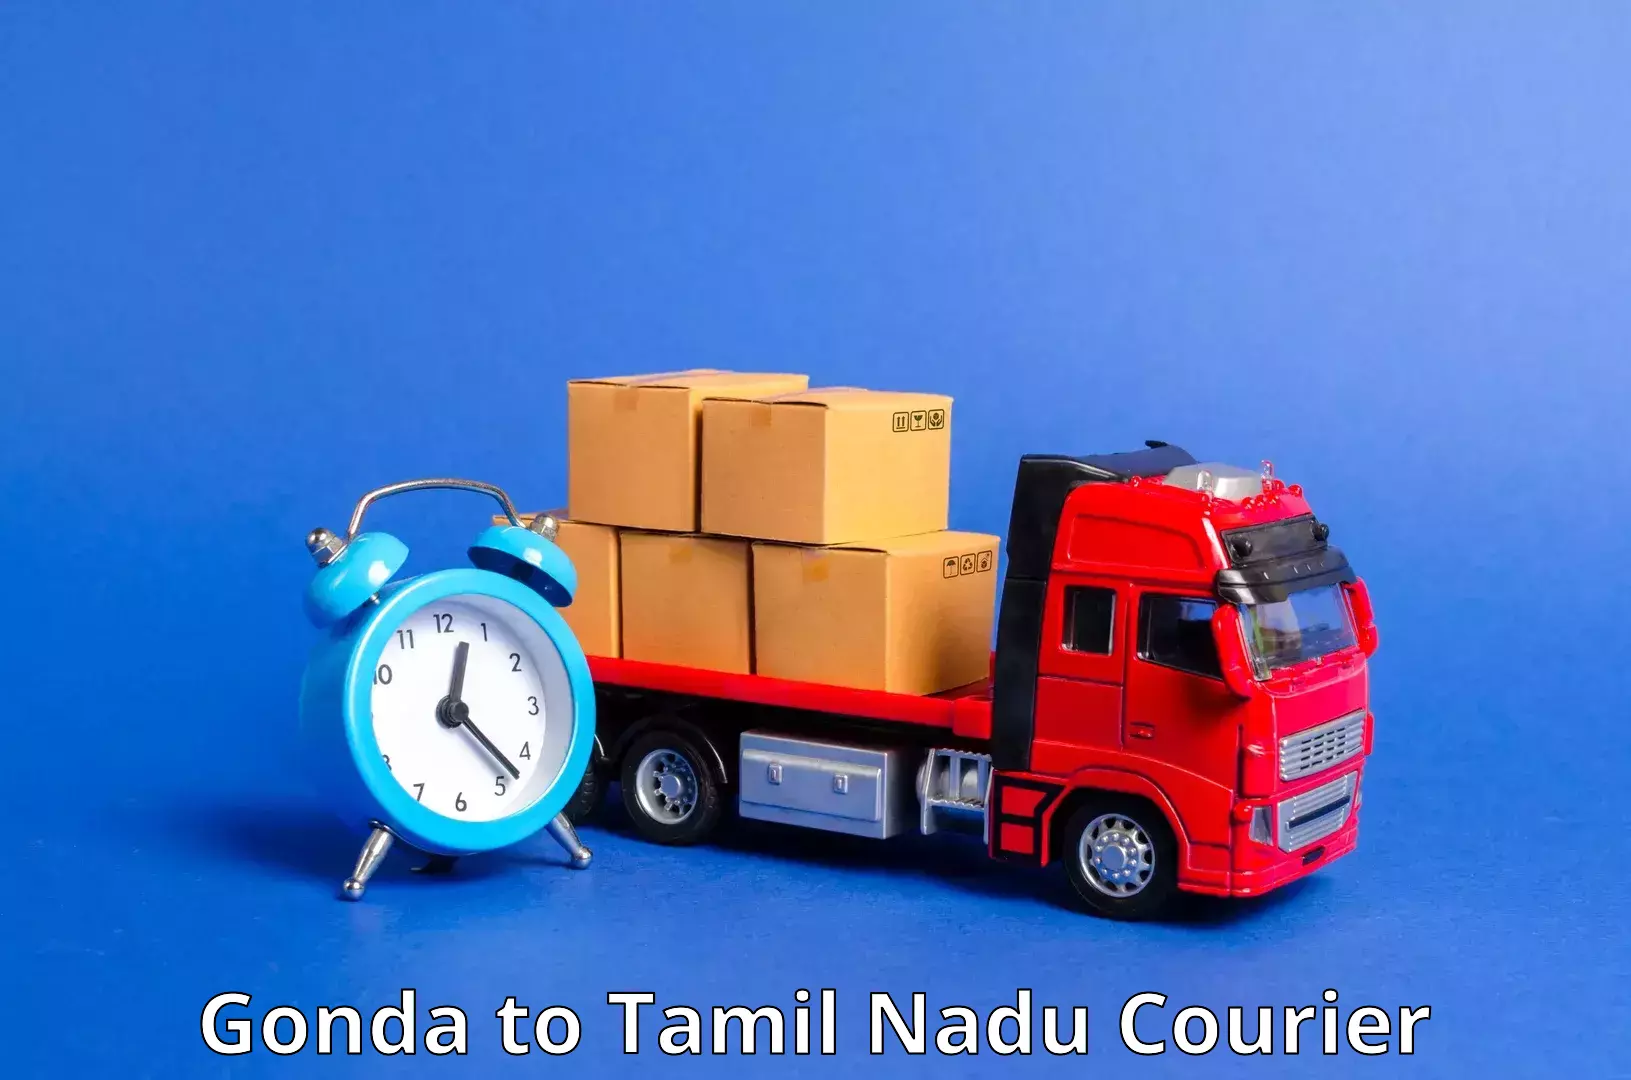 Customizable delivery plans in Gonda to Chengalpattu